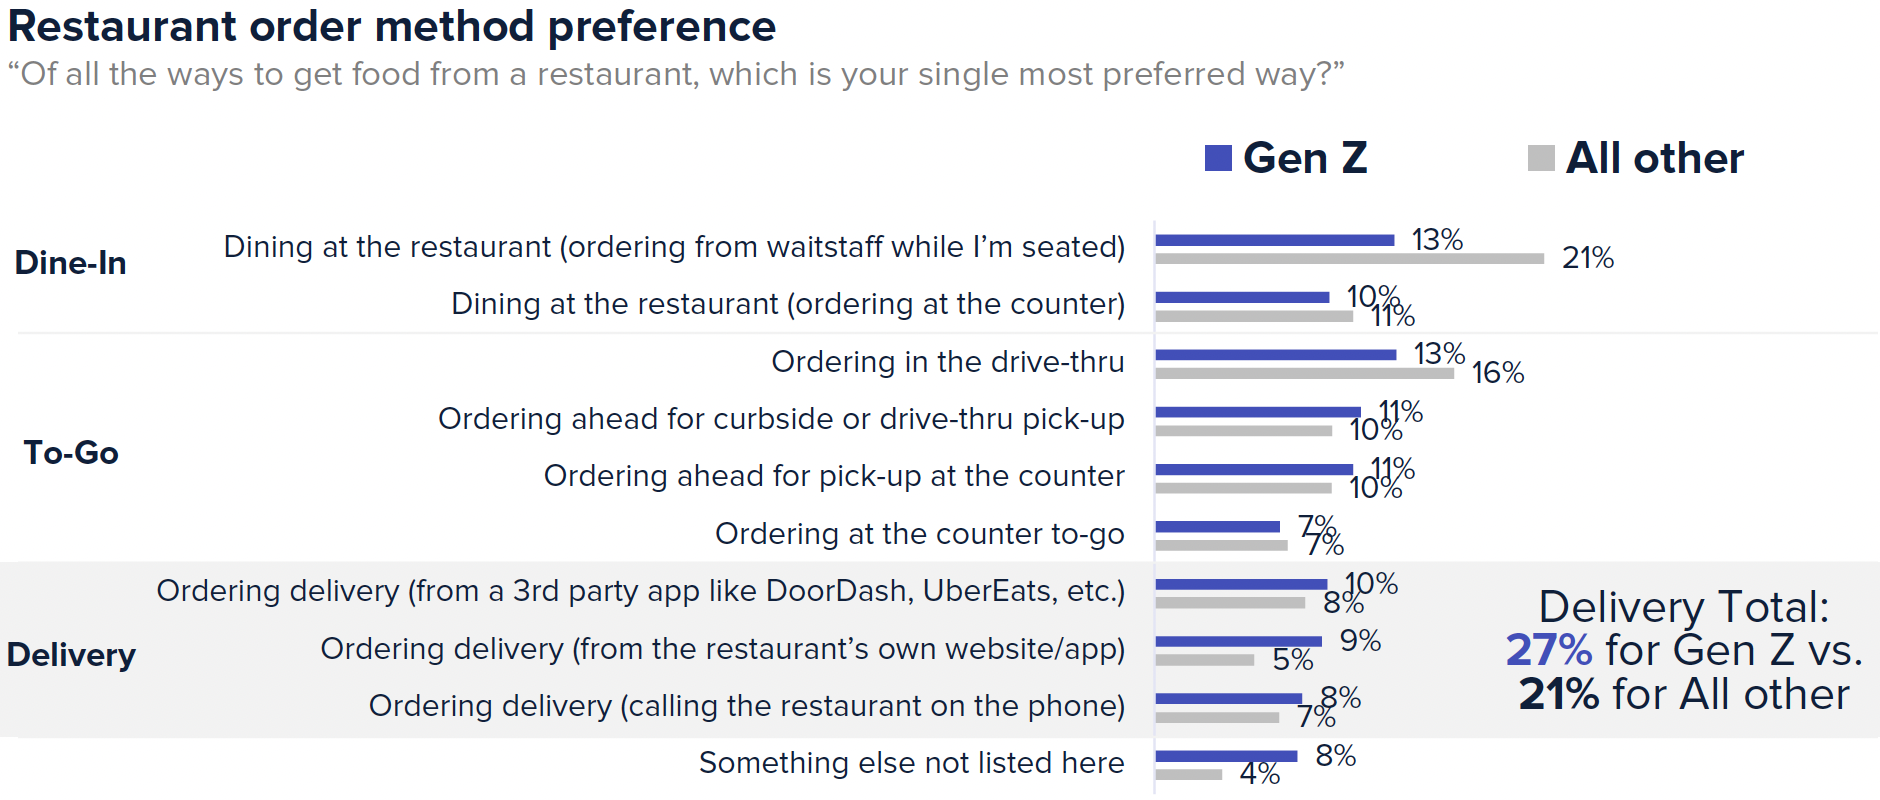 Restaurant order method preference. 27% of Gen Z prefer delivery compared to 21% for other generations.